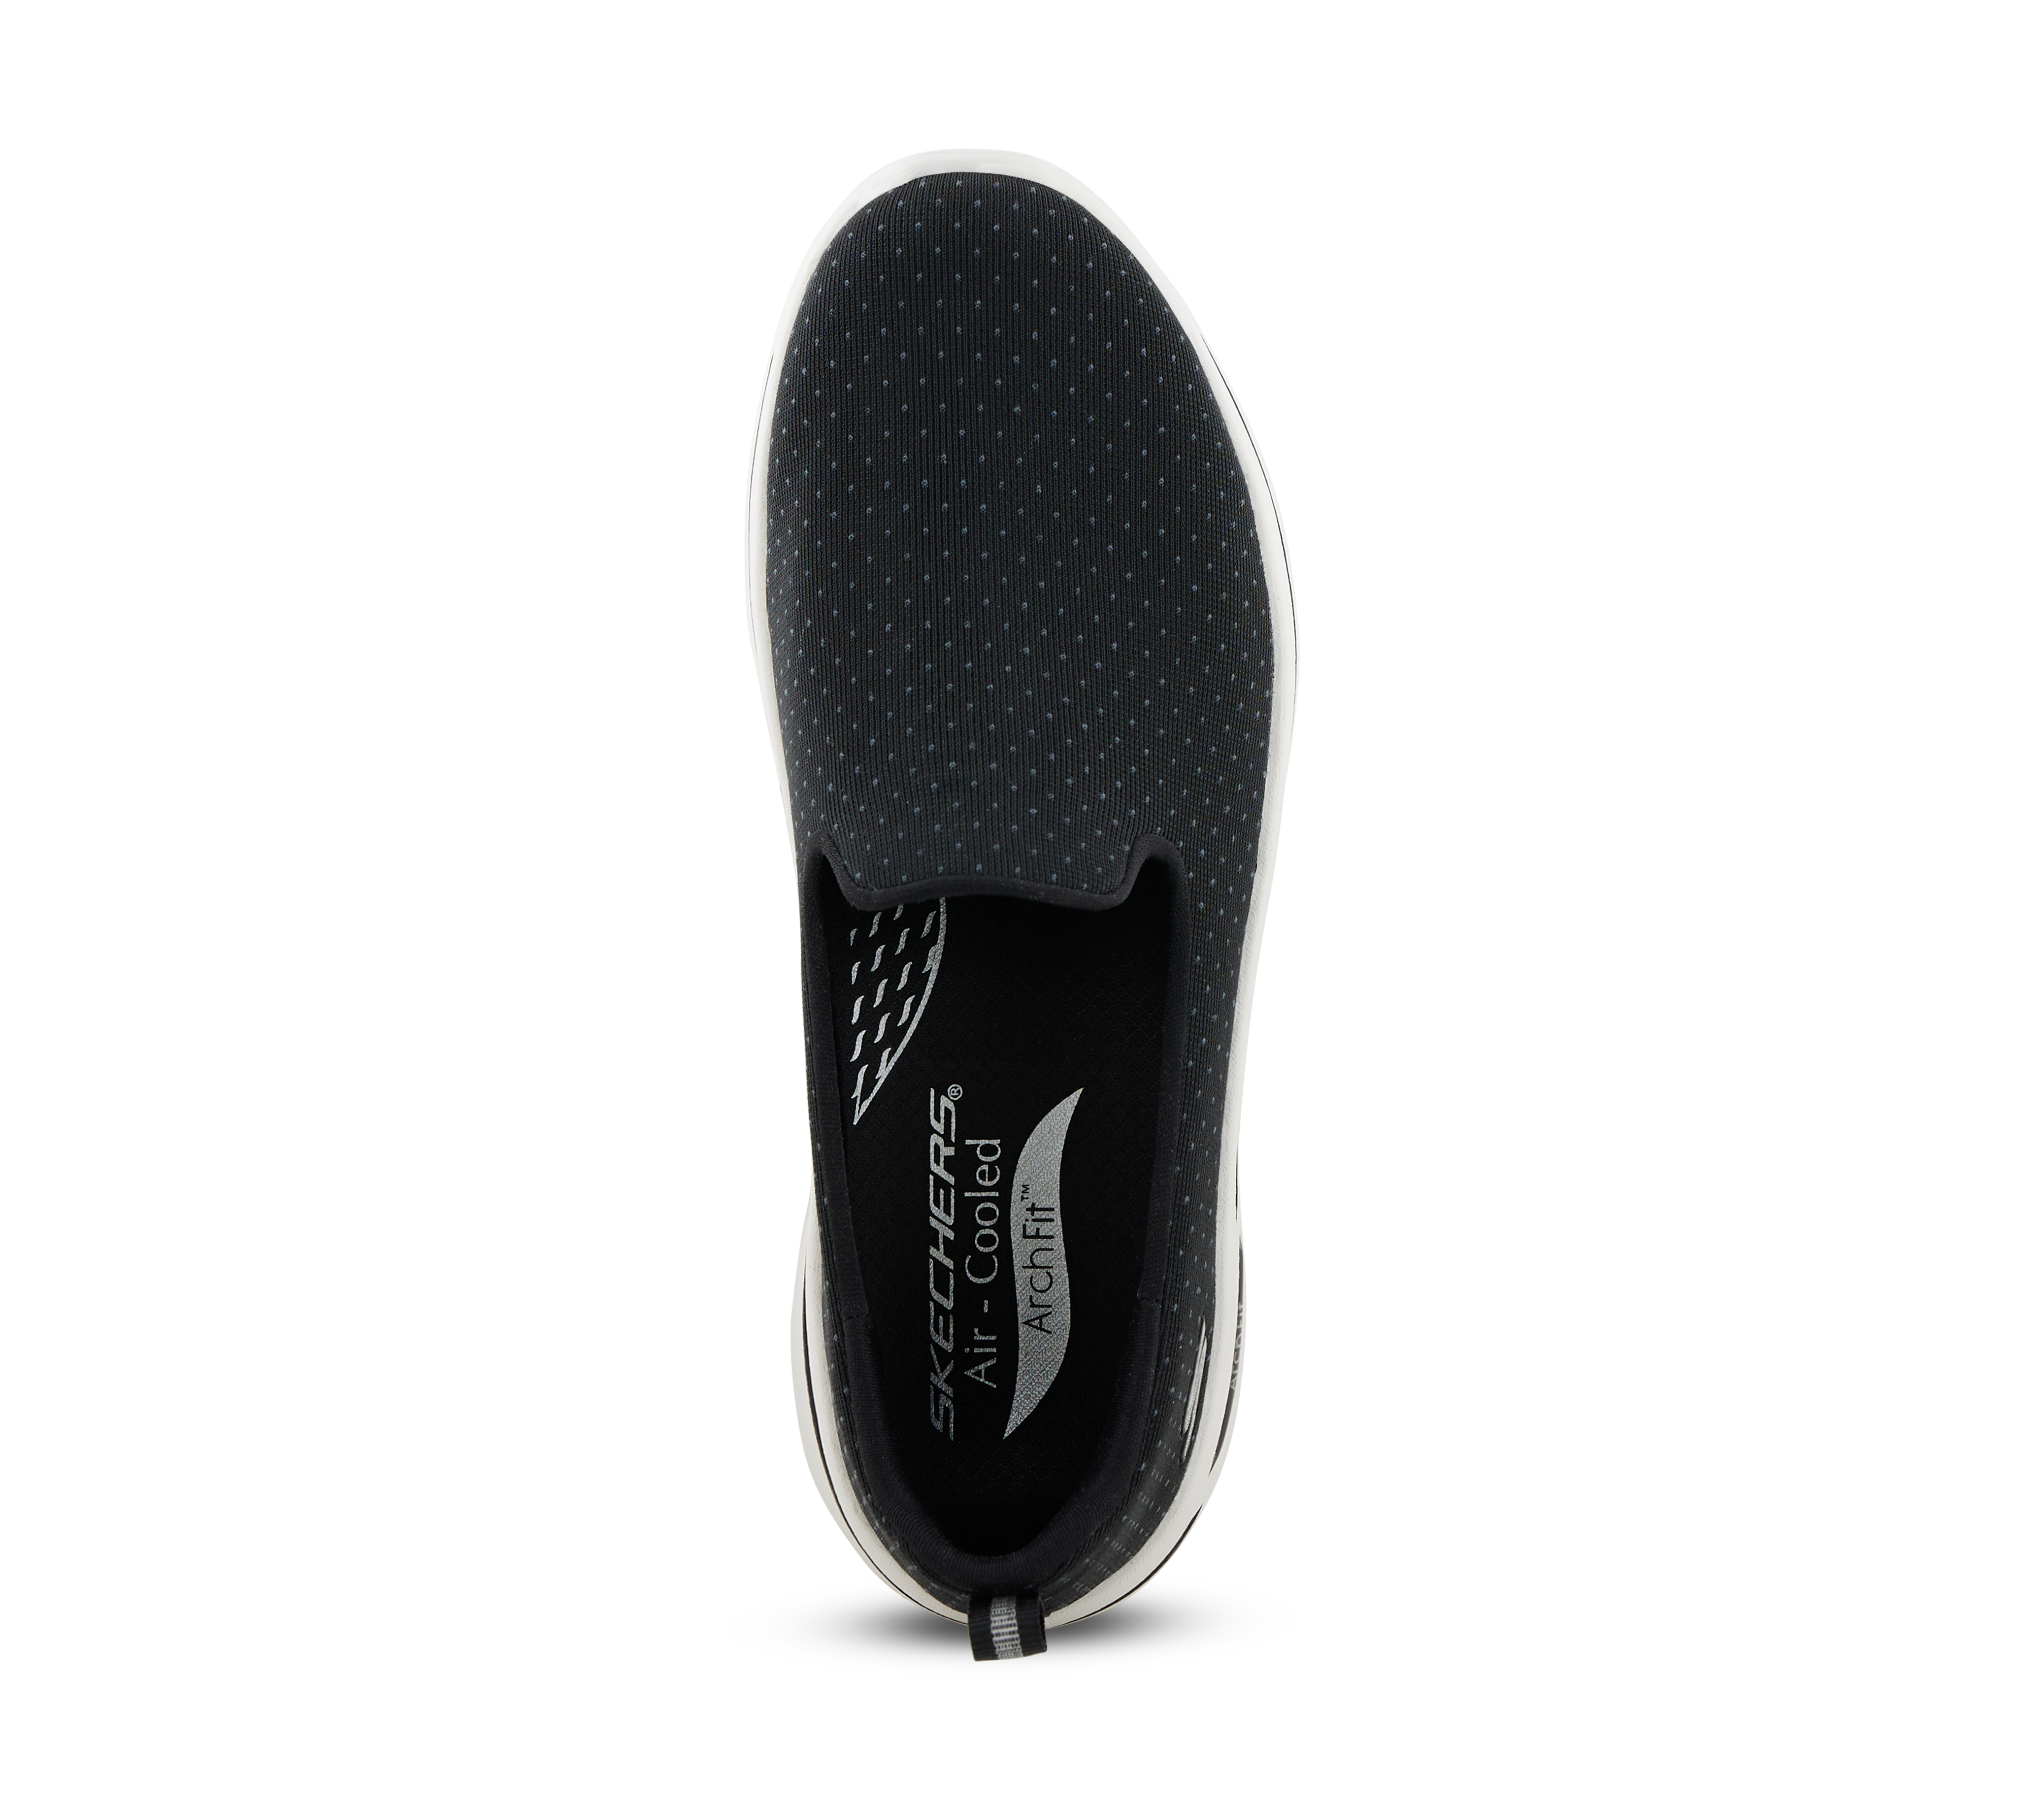 GO WALK ARCH FIT - MORNING ST, BLACK/WHITE Footwear Top View